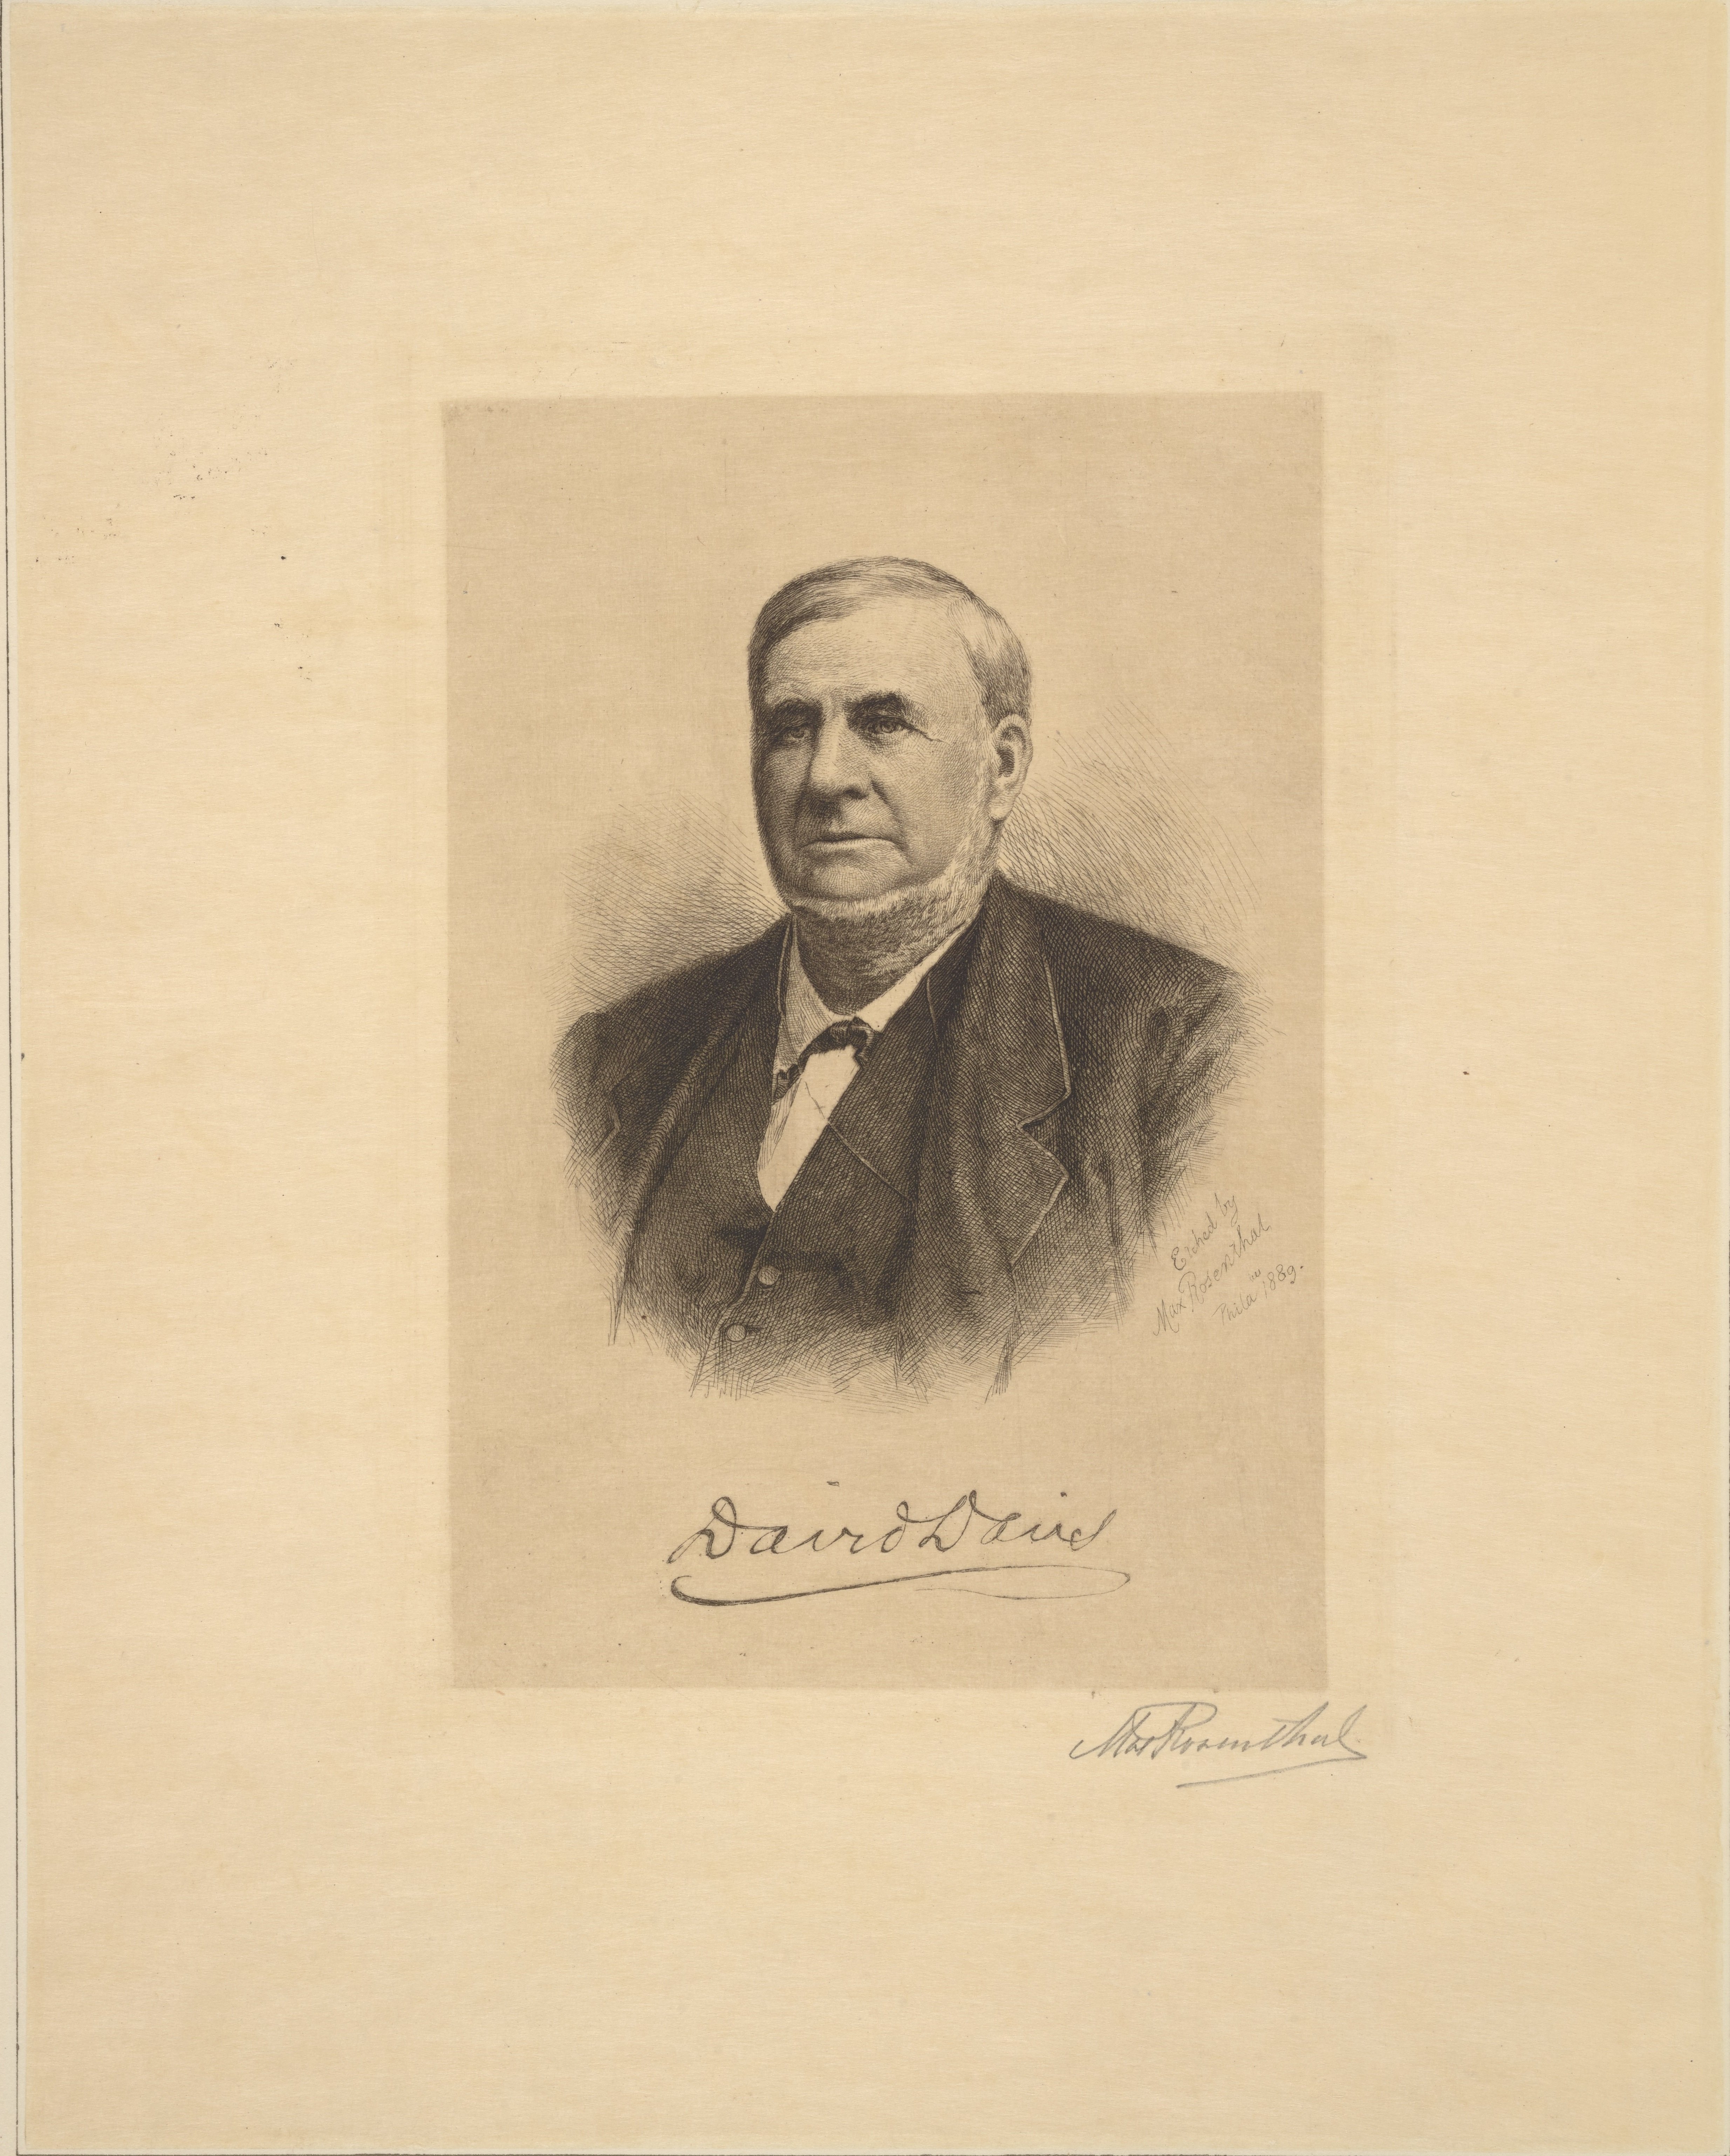 Digital image of print of etched portrait of David Davis by Max Rosenthal, 1889.